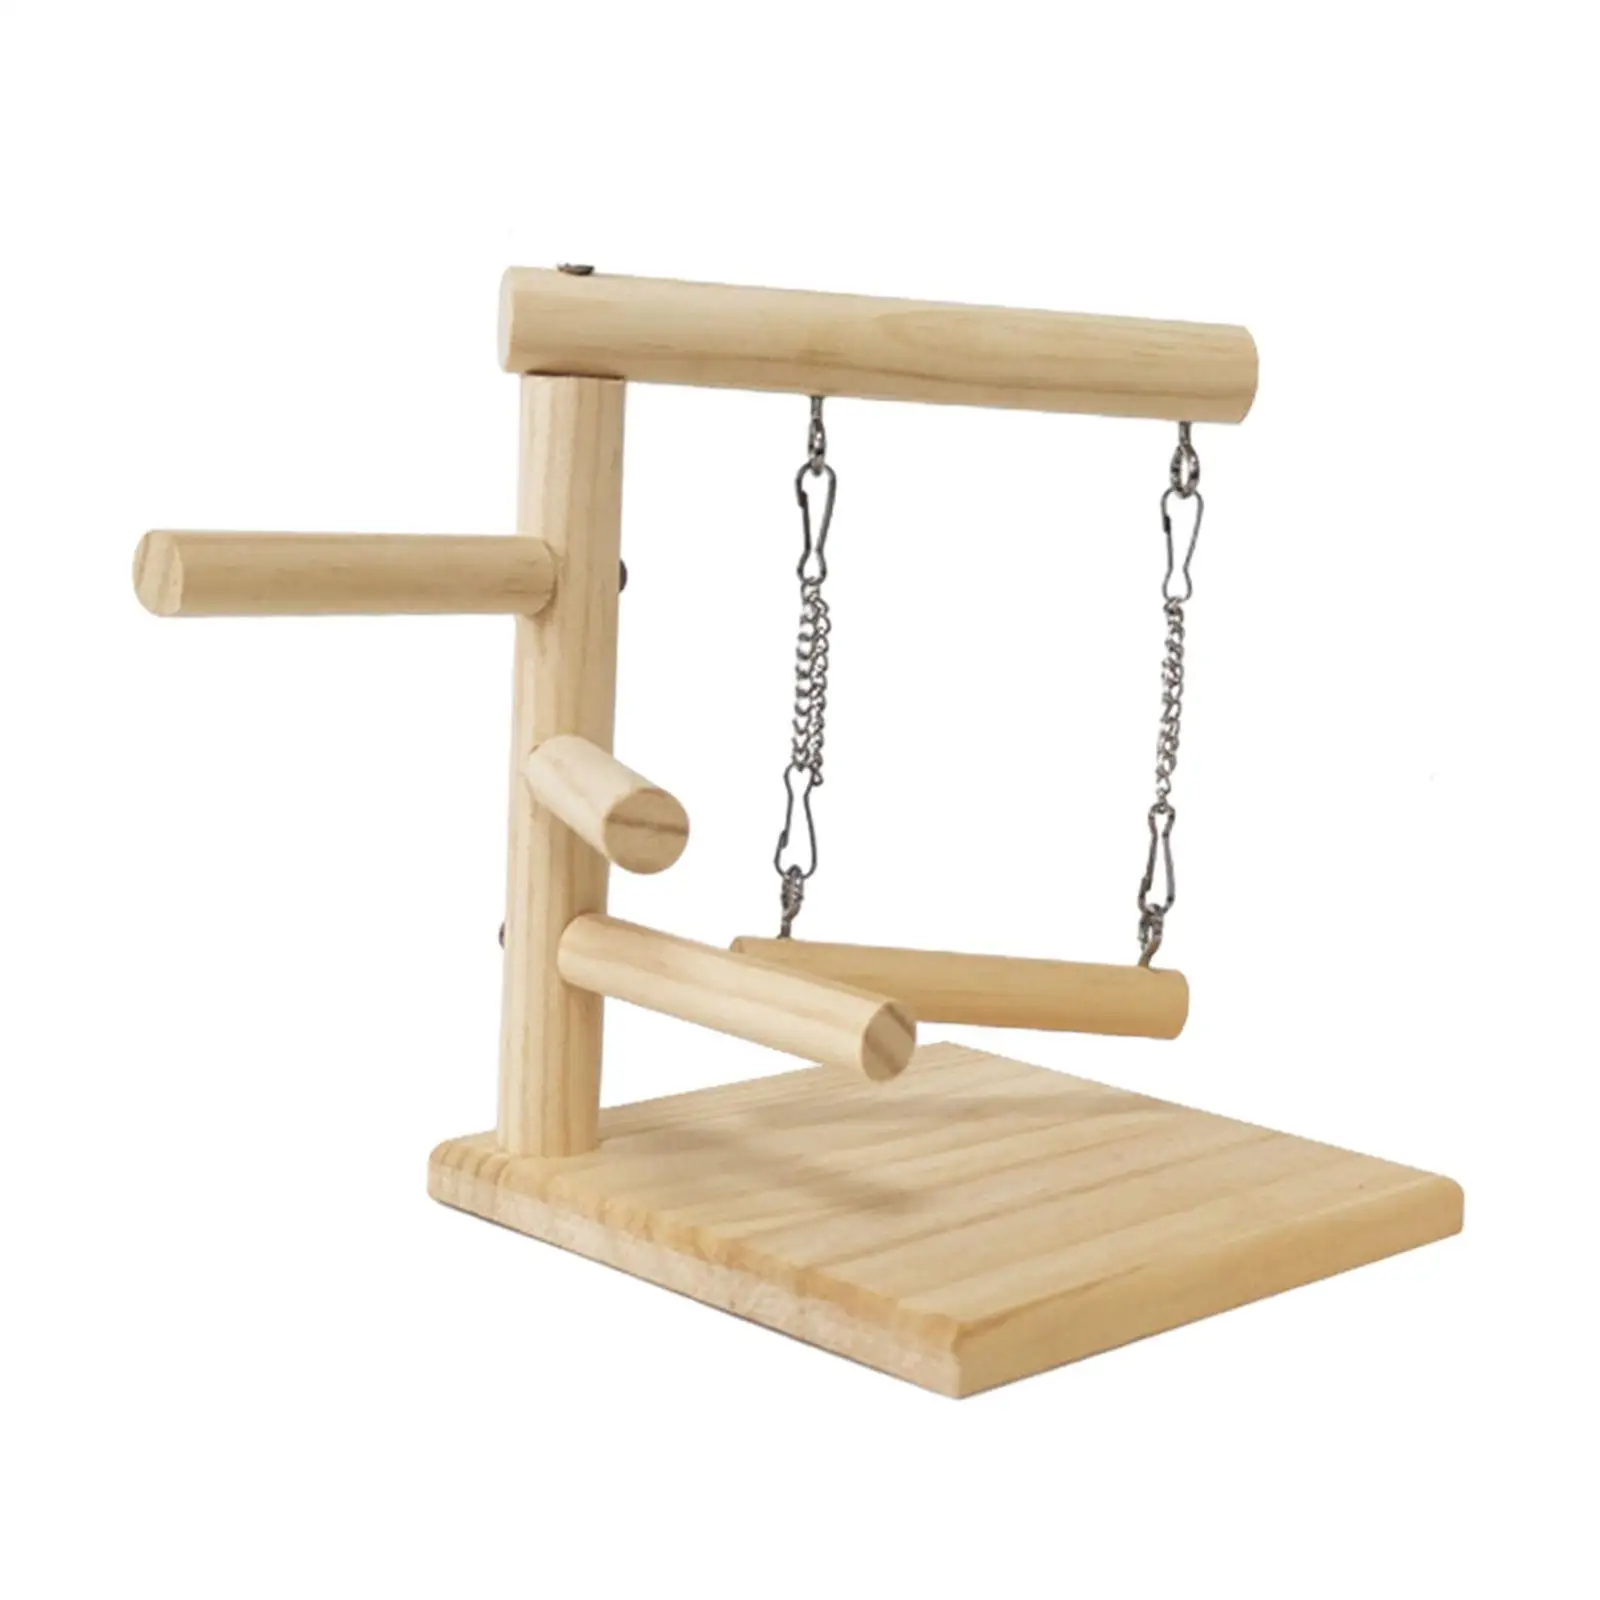 Bird Perch Stand Tabletop Exercise Gym Playground Wooden Perch Playstand Platform for Parrots Lovebirds Cockatiels Canaries